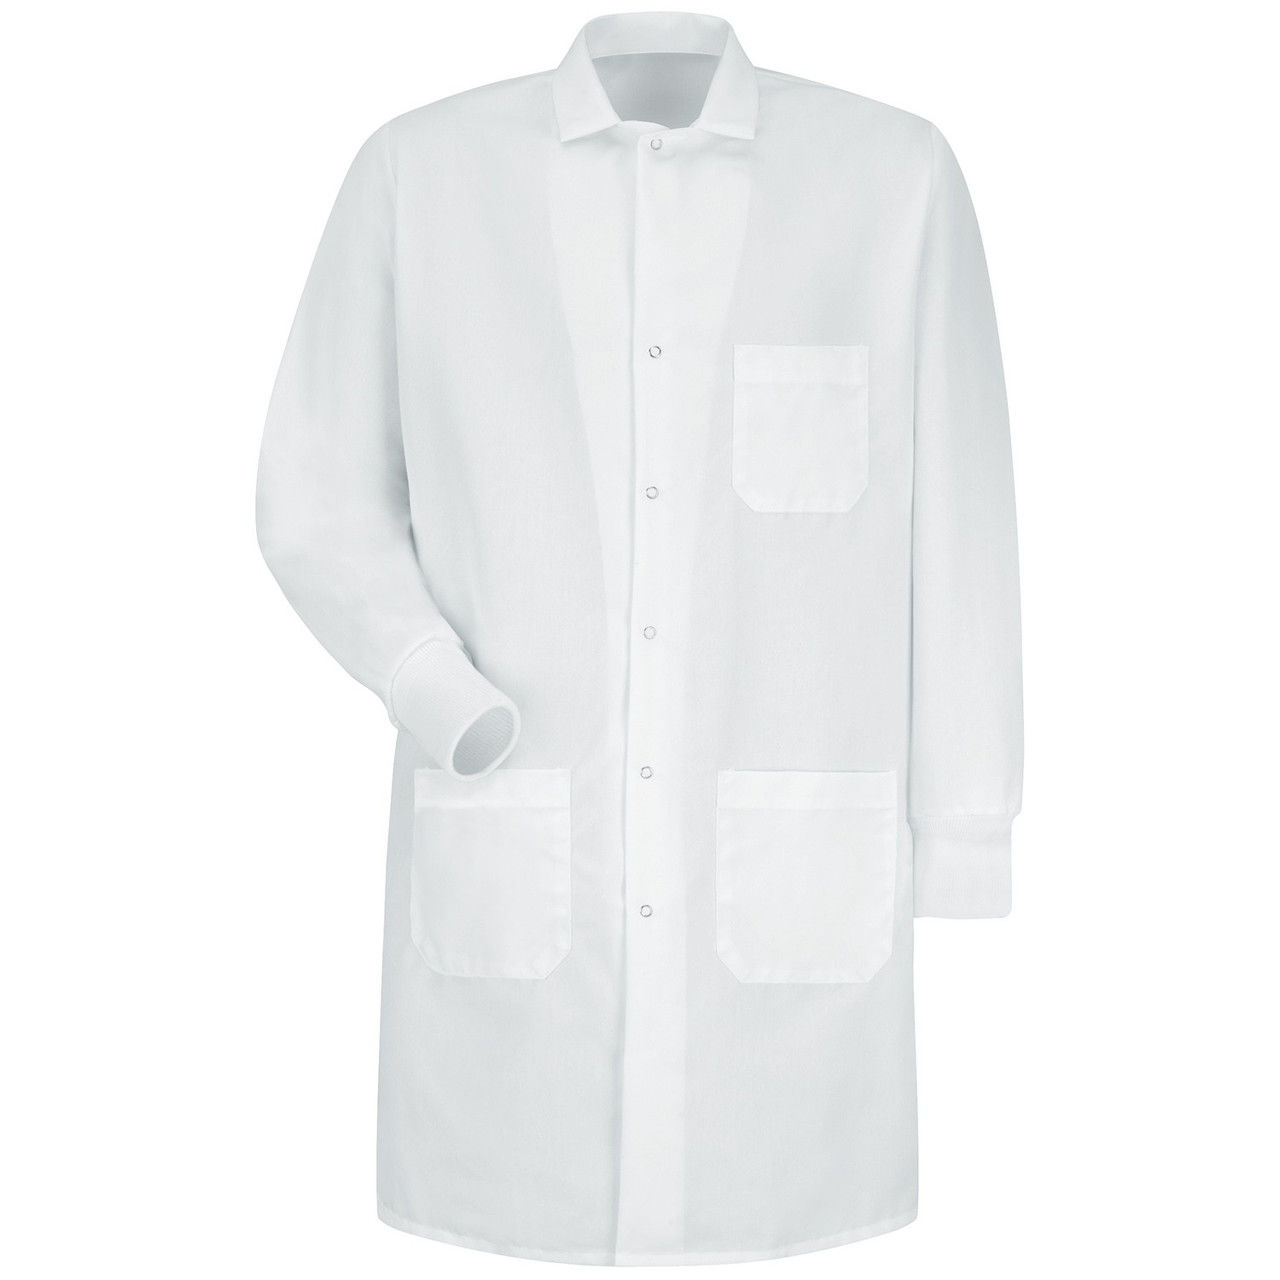 Red Kap KP70WH Unisex Specialized Cuffed Lab Coat Questions & Answers